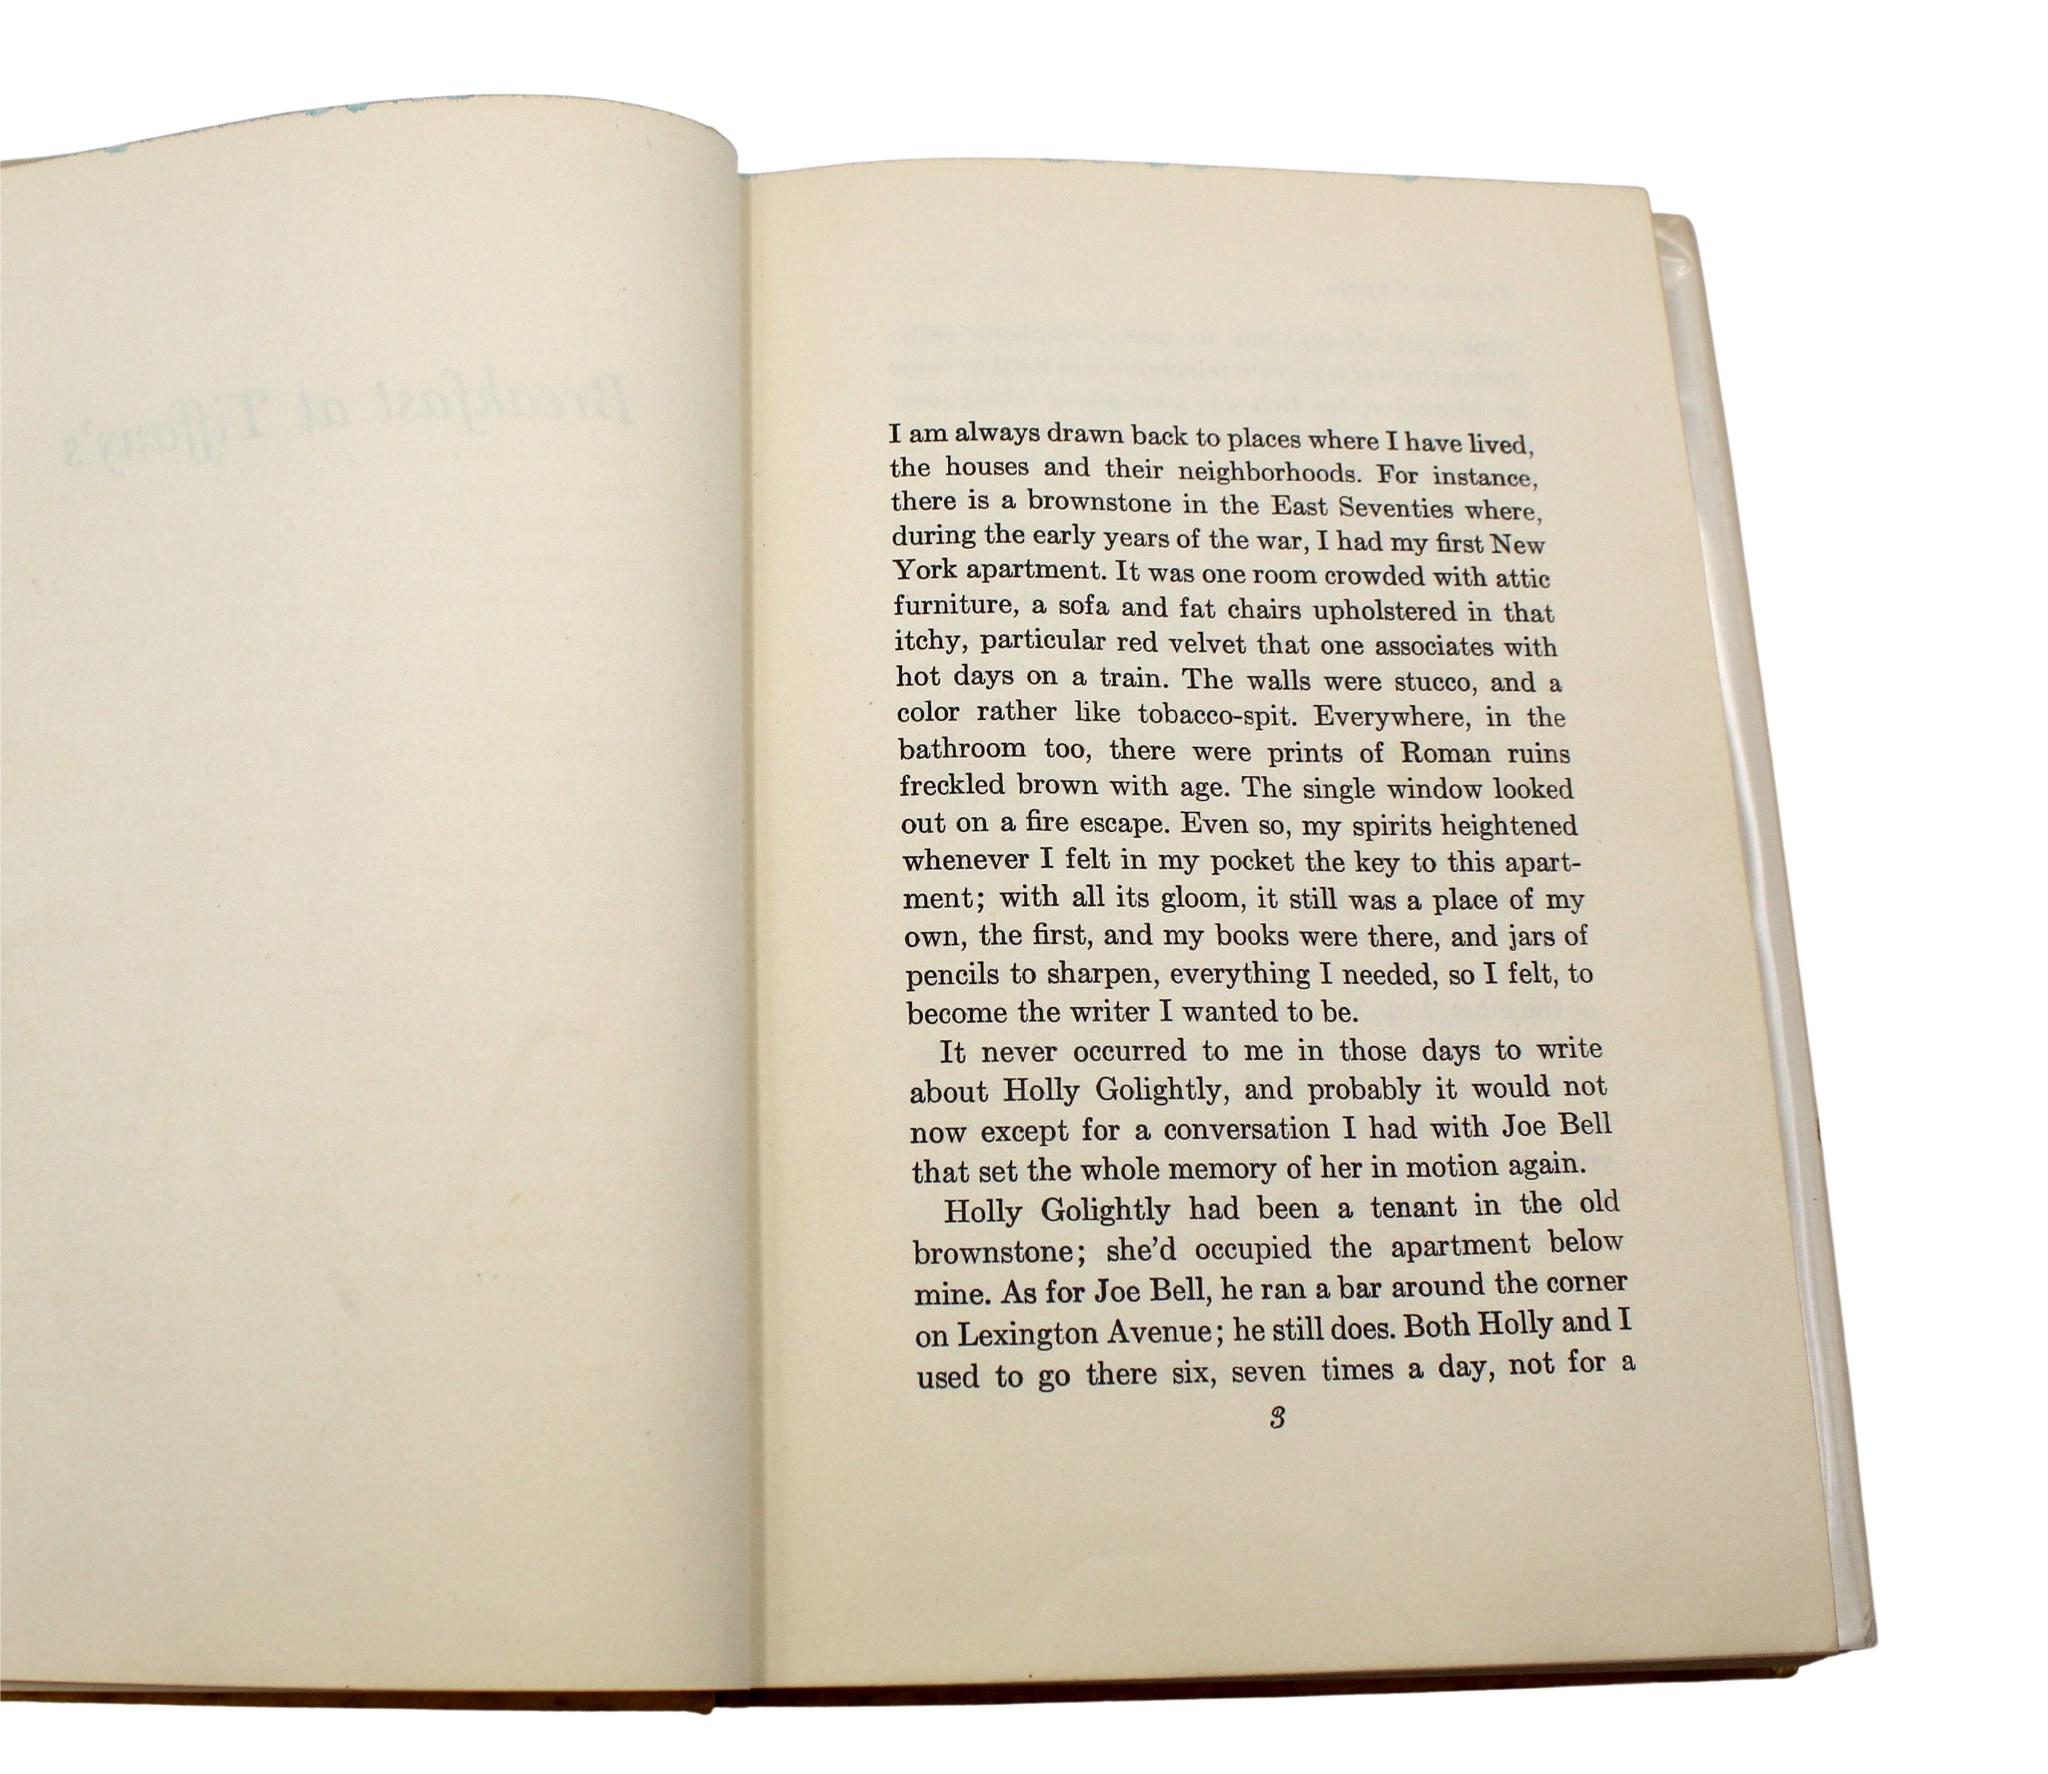 American Breakfast at Tiffany's, Signed by Truman Capote, First Edition, 1958 For Sale